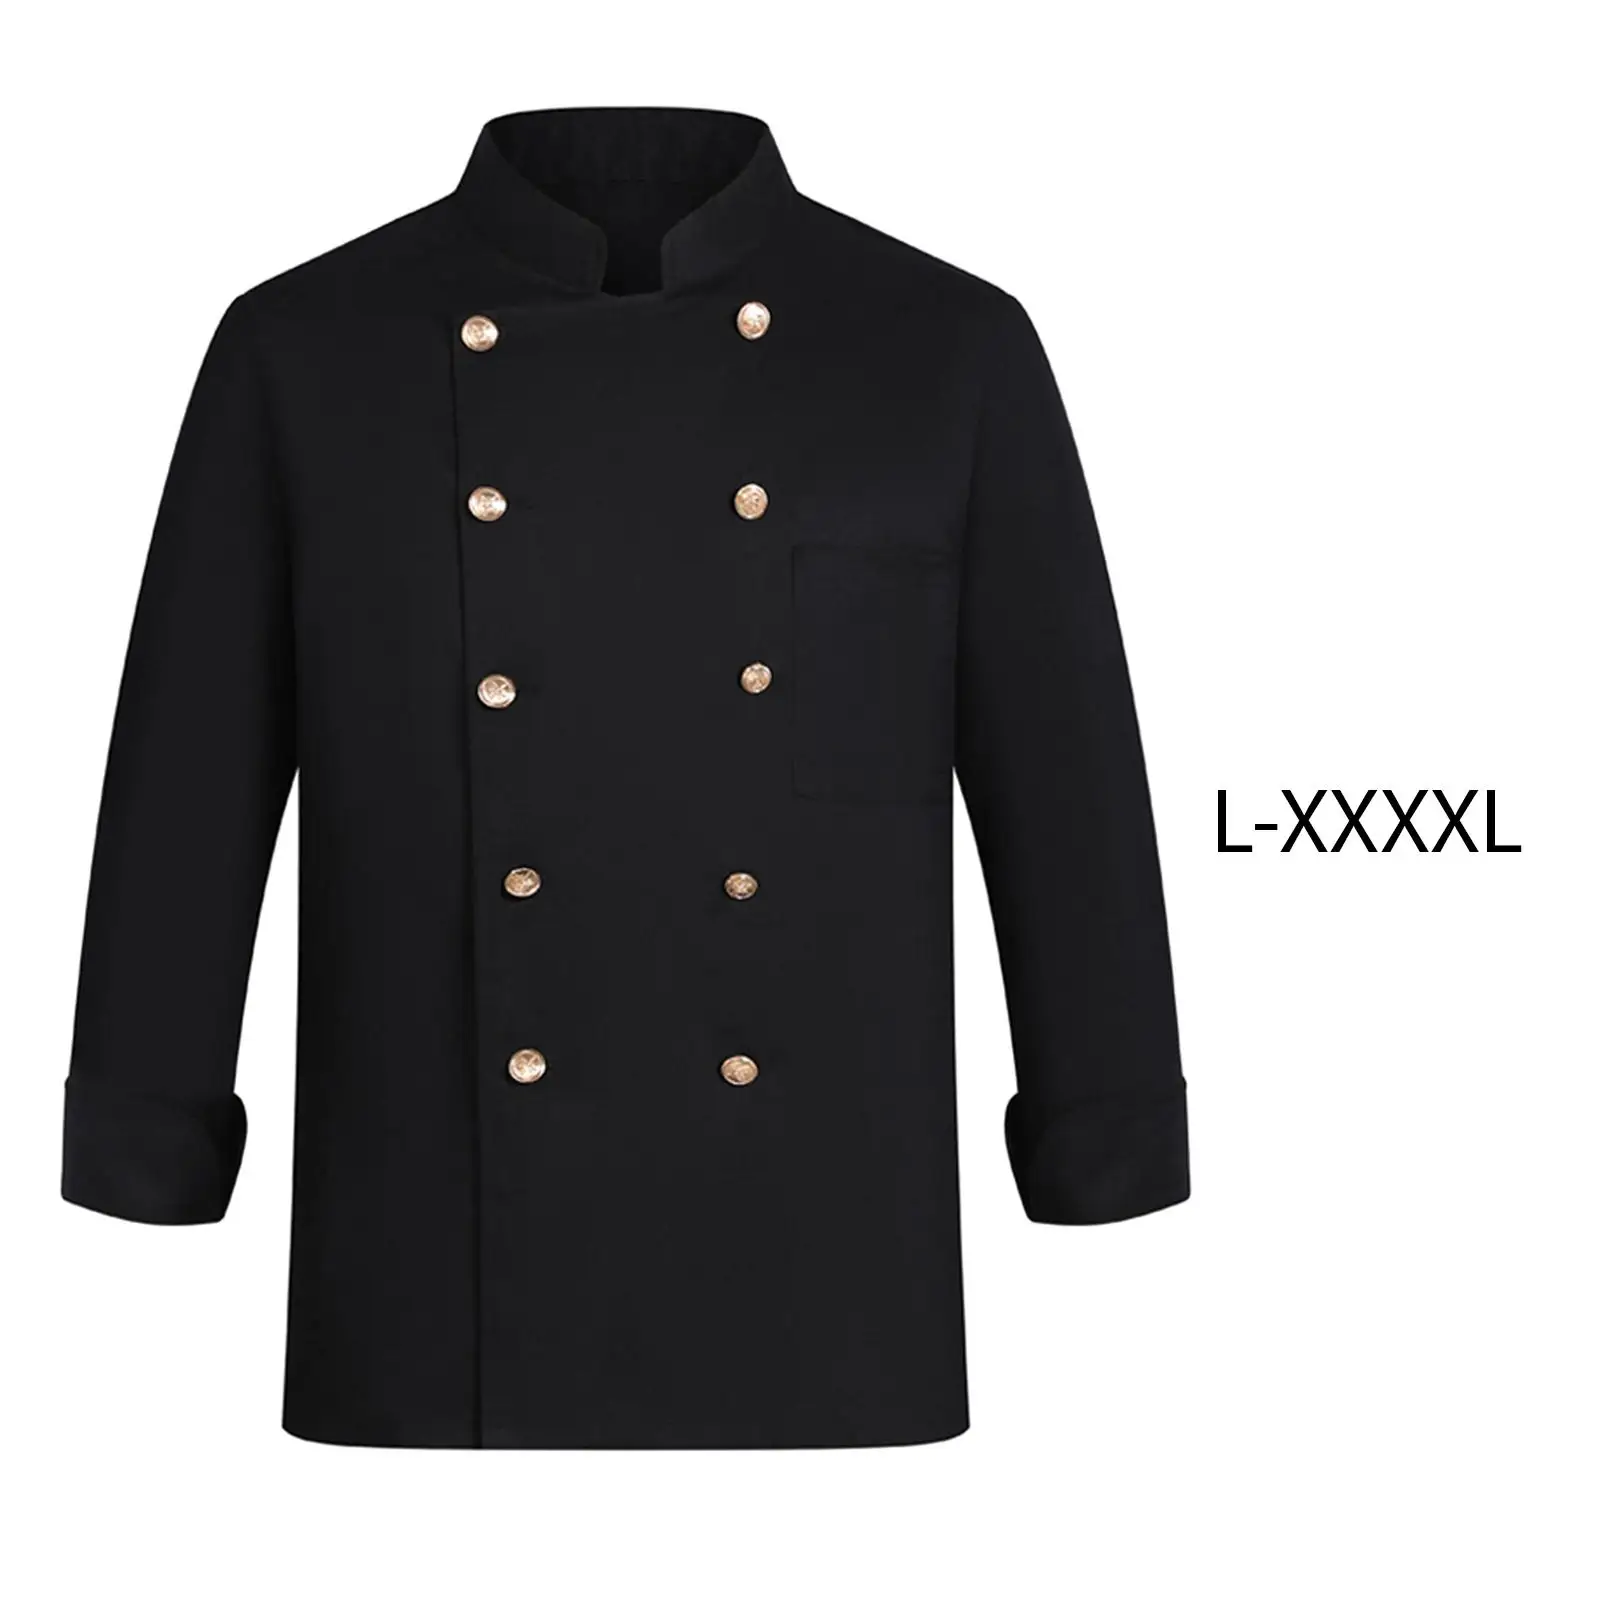 Unisex  Long Length Sleeve Fall Breathable Executive Chef Jacket Coat Overalls for Waiter, Catering, Hotel, Kitchen, Cook